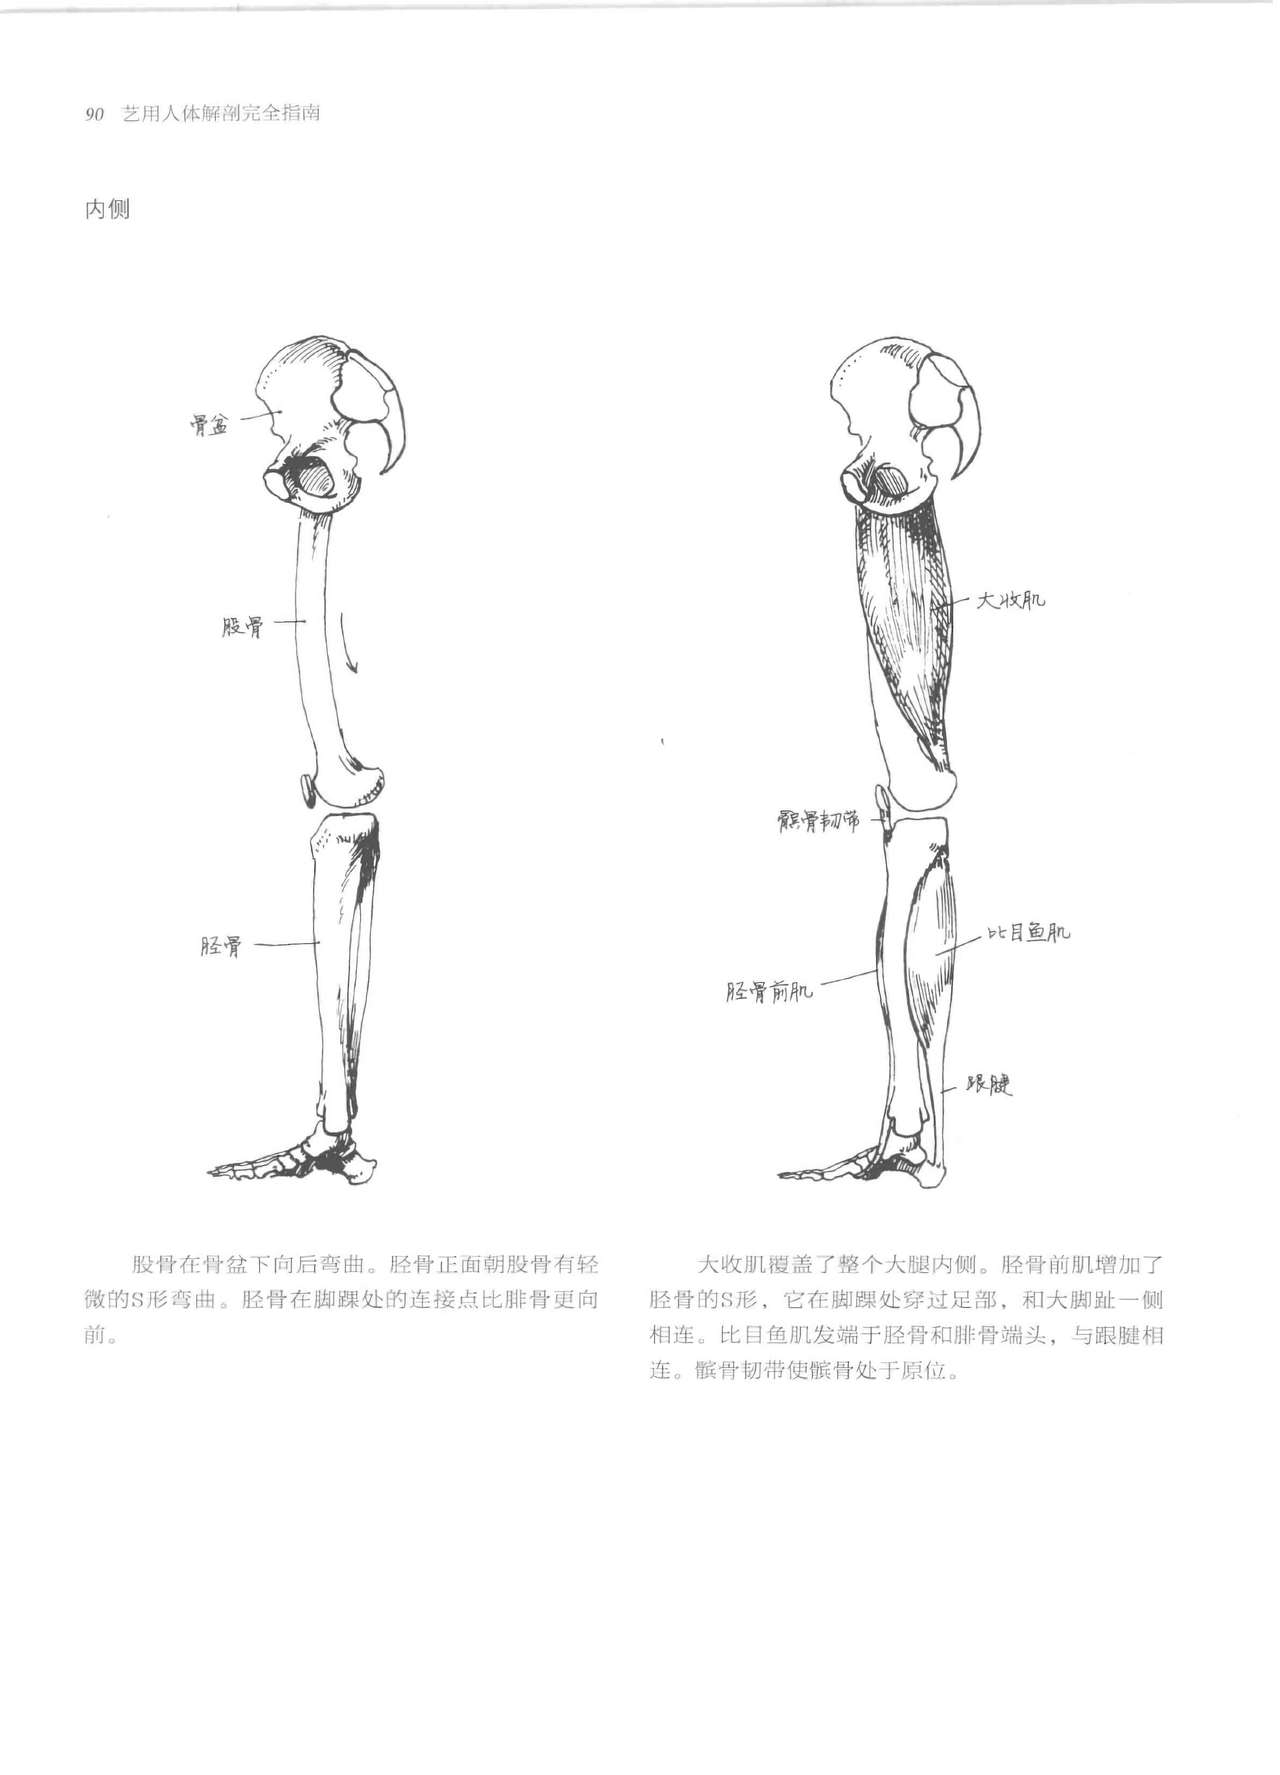 Anatomy-A Complete Guide for Artists - Joseph Sheppard [Chinese] 90